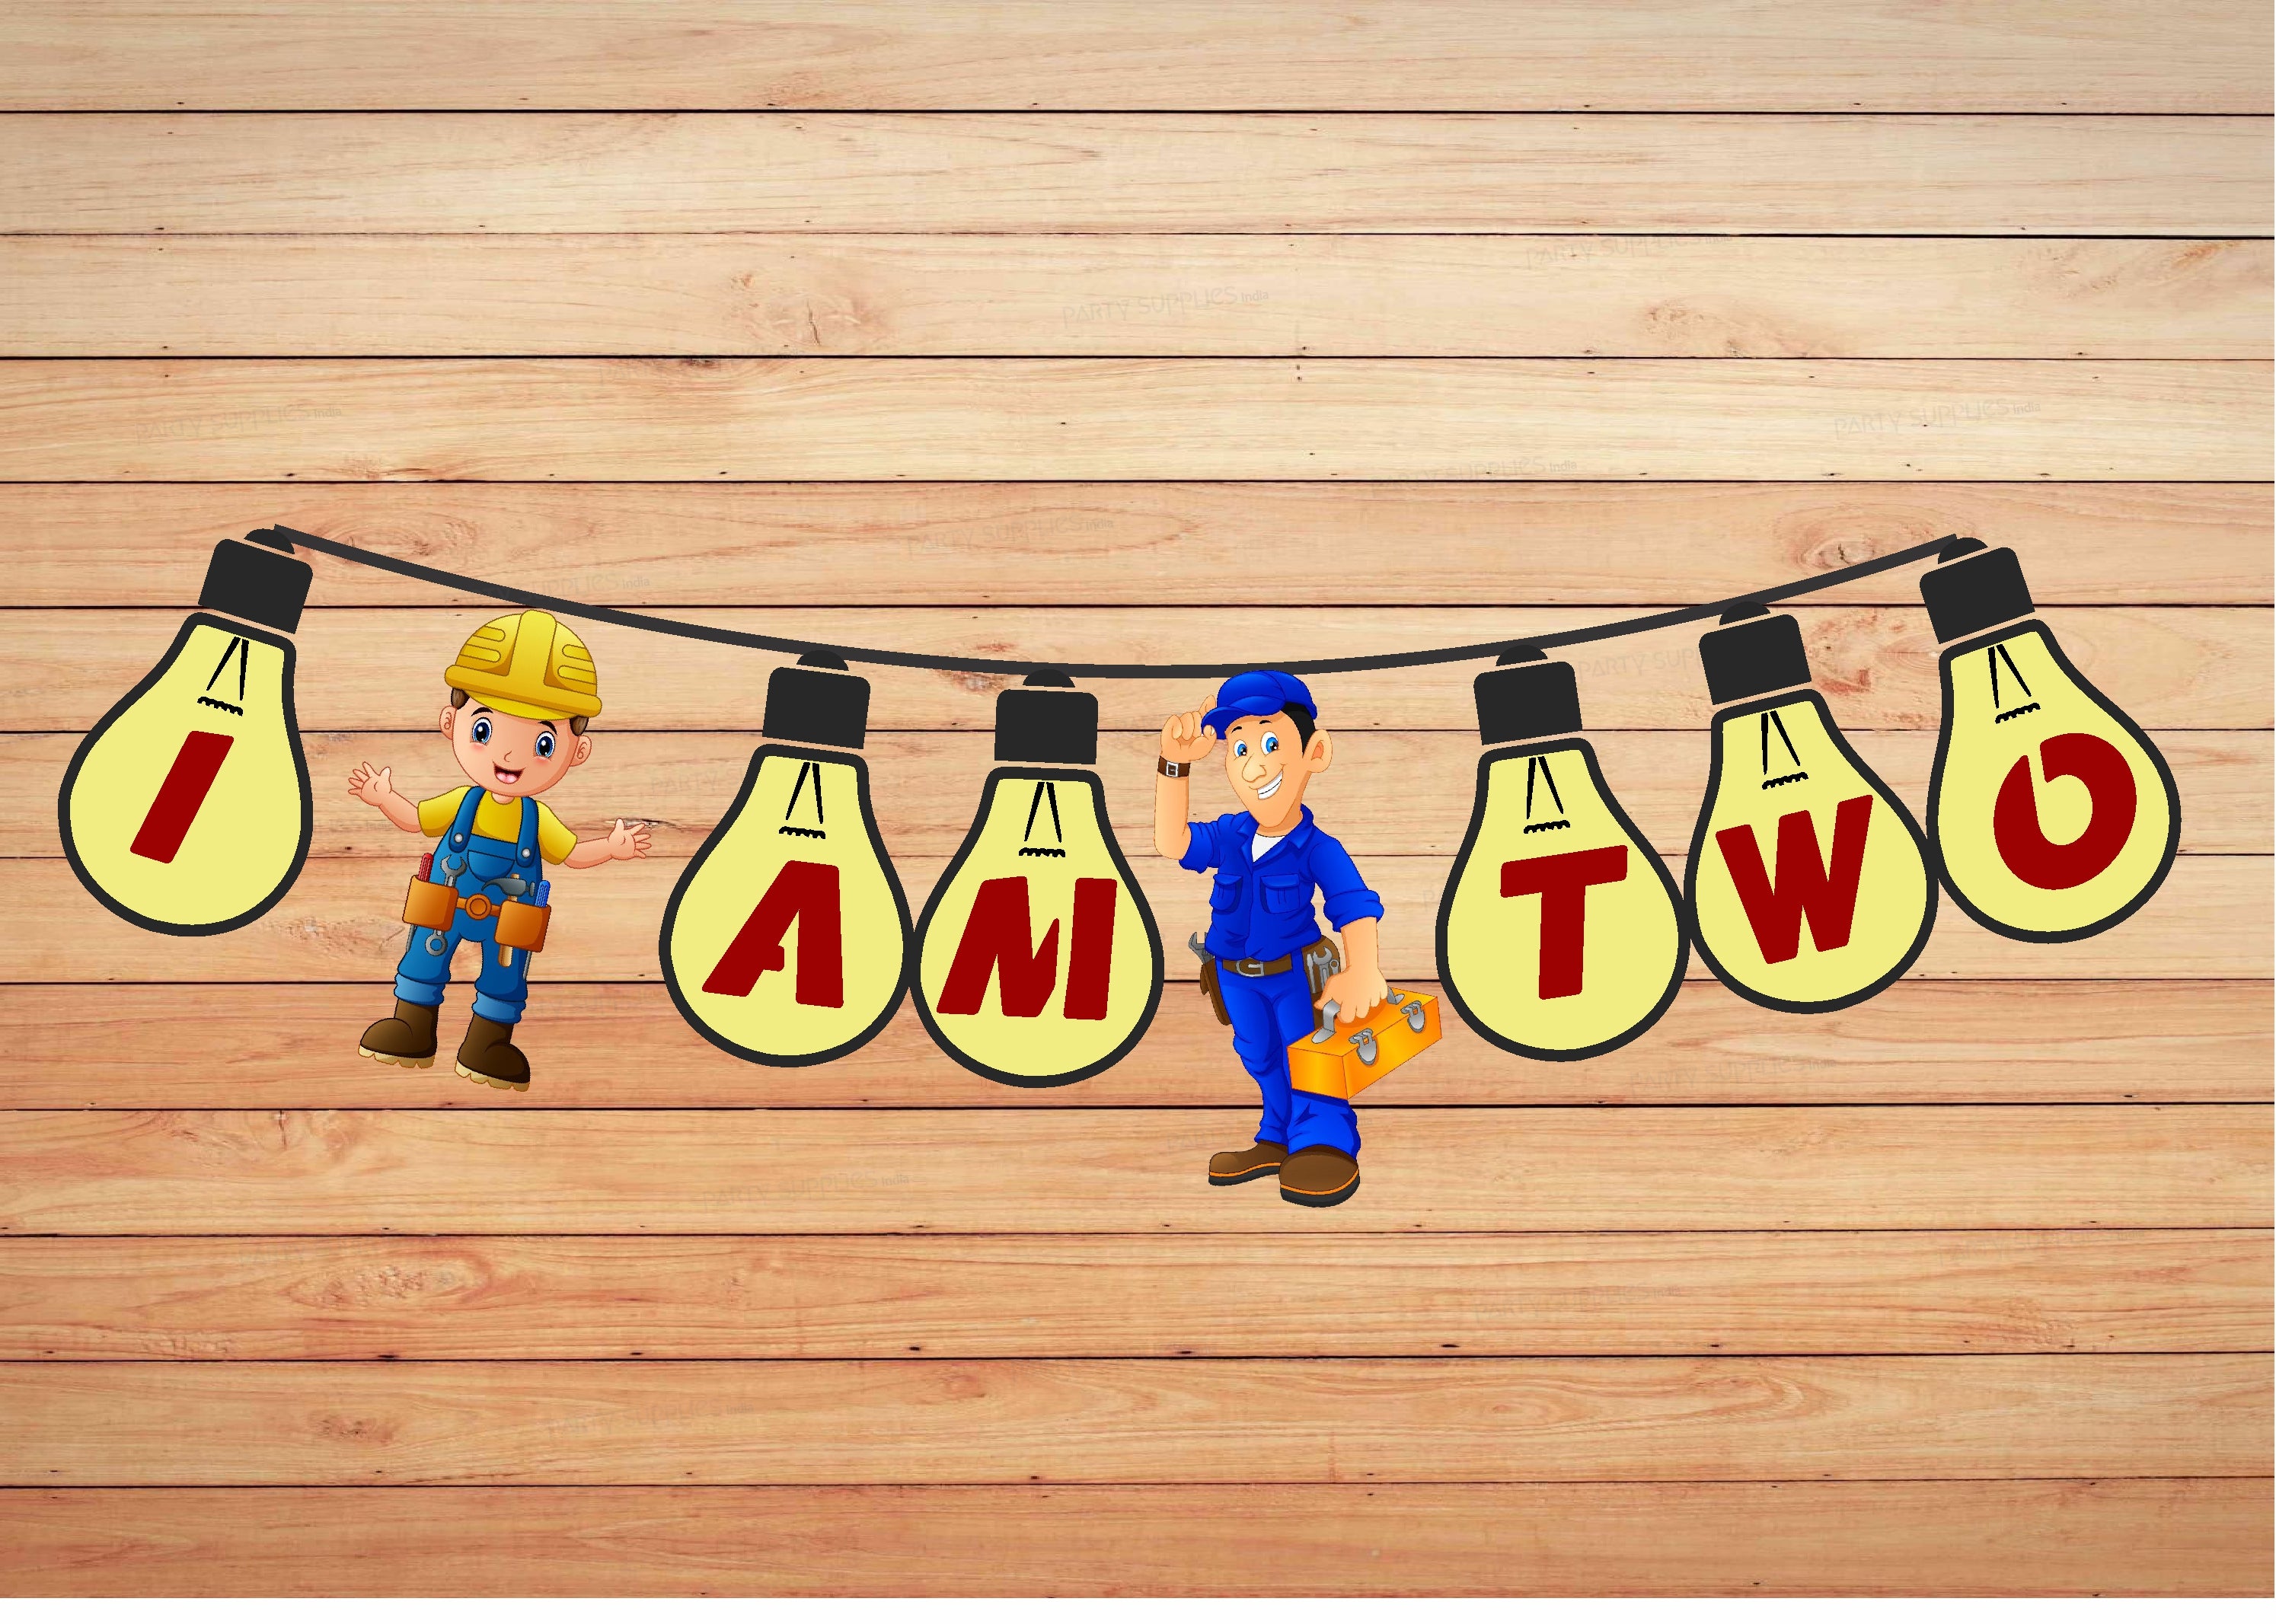 PSI  Electrician Theme Age  Hanging